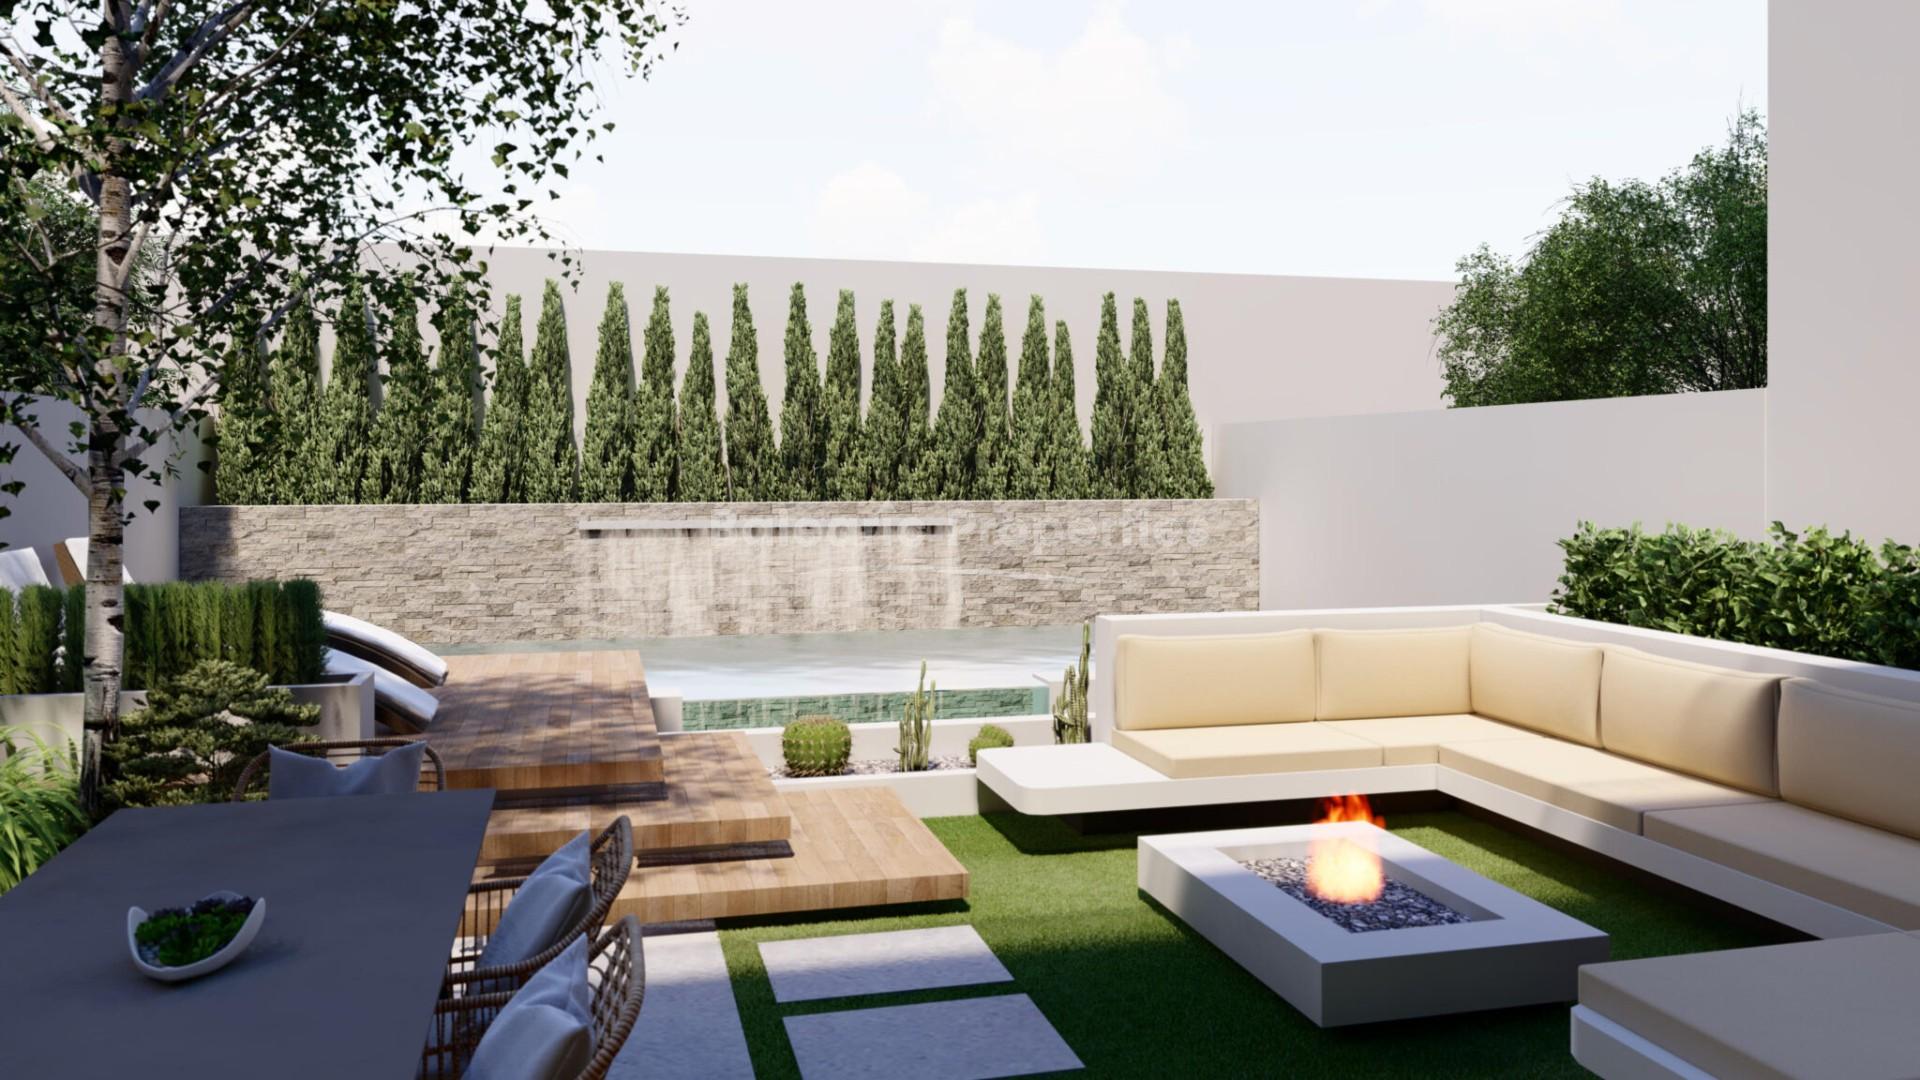 City centre house project with building license for sale in Palma, Mallorca